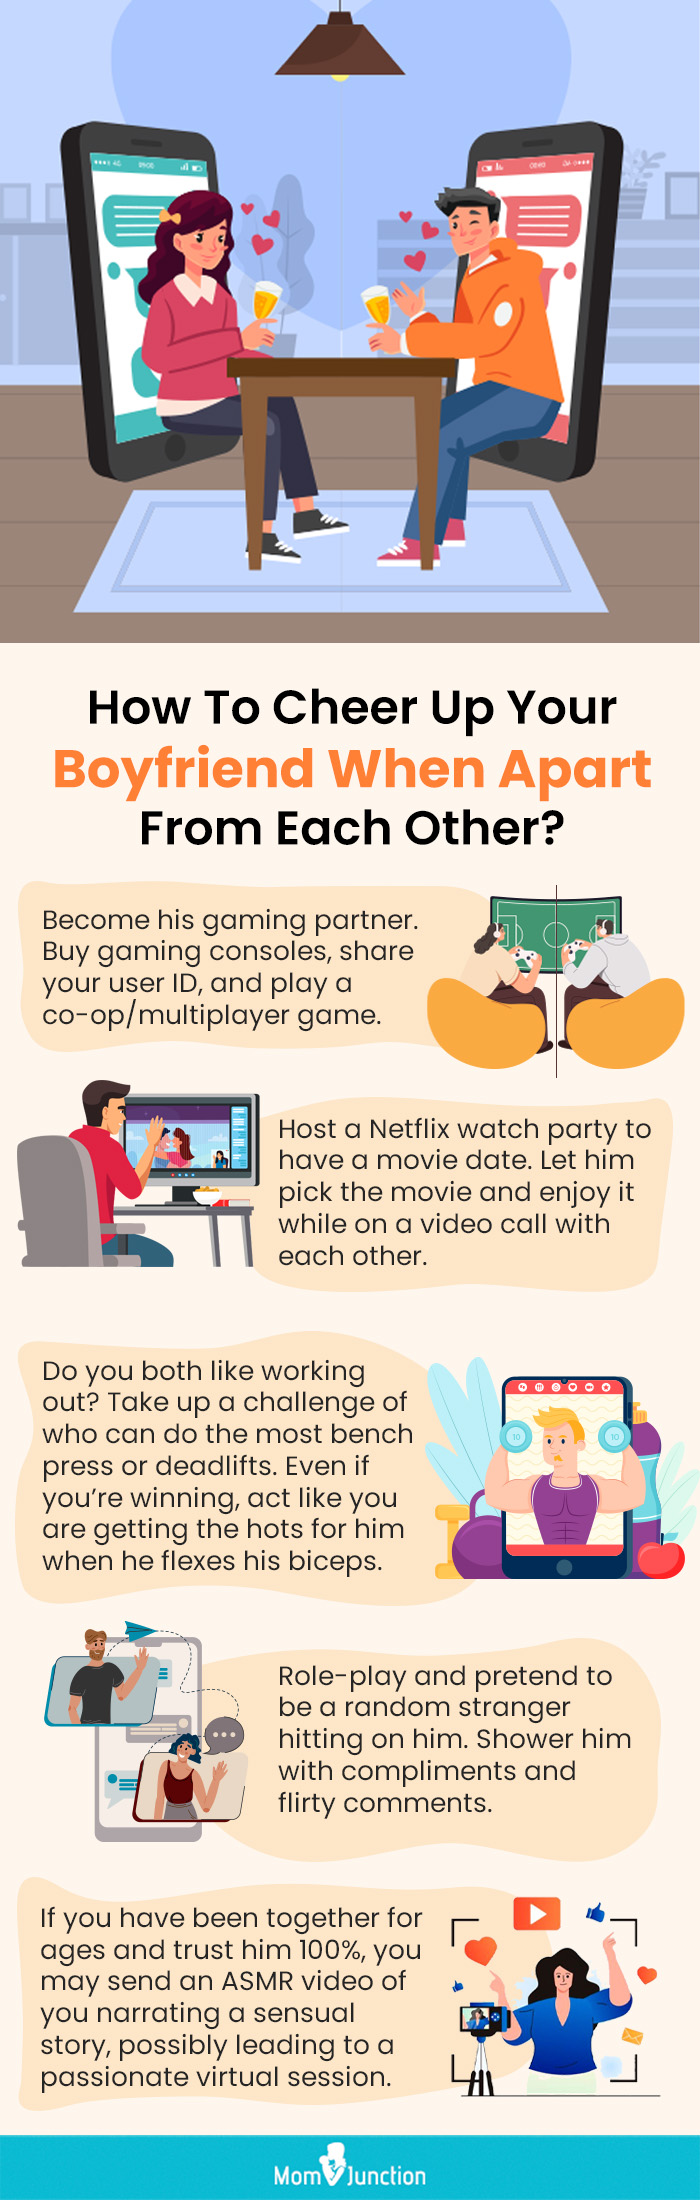 tips to keep him happy when apart from each other [infographic]